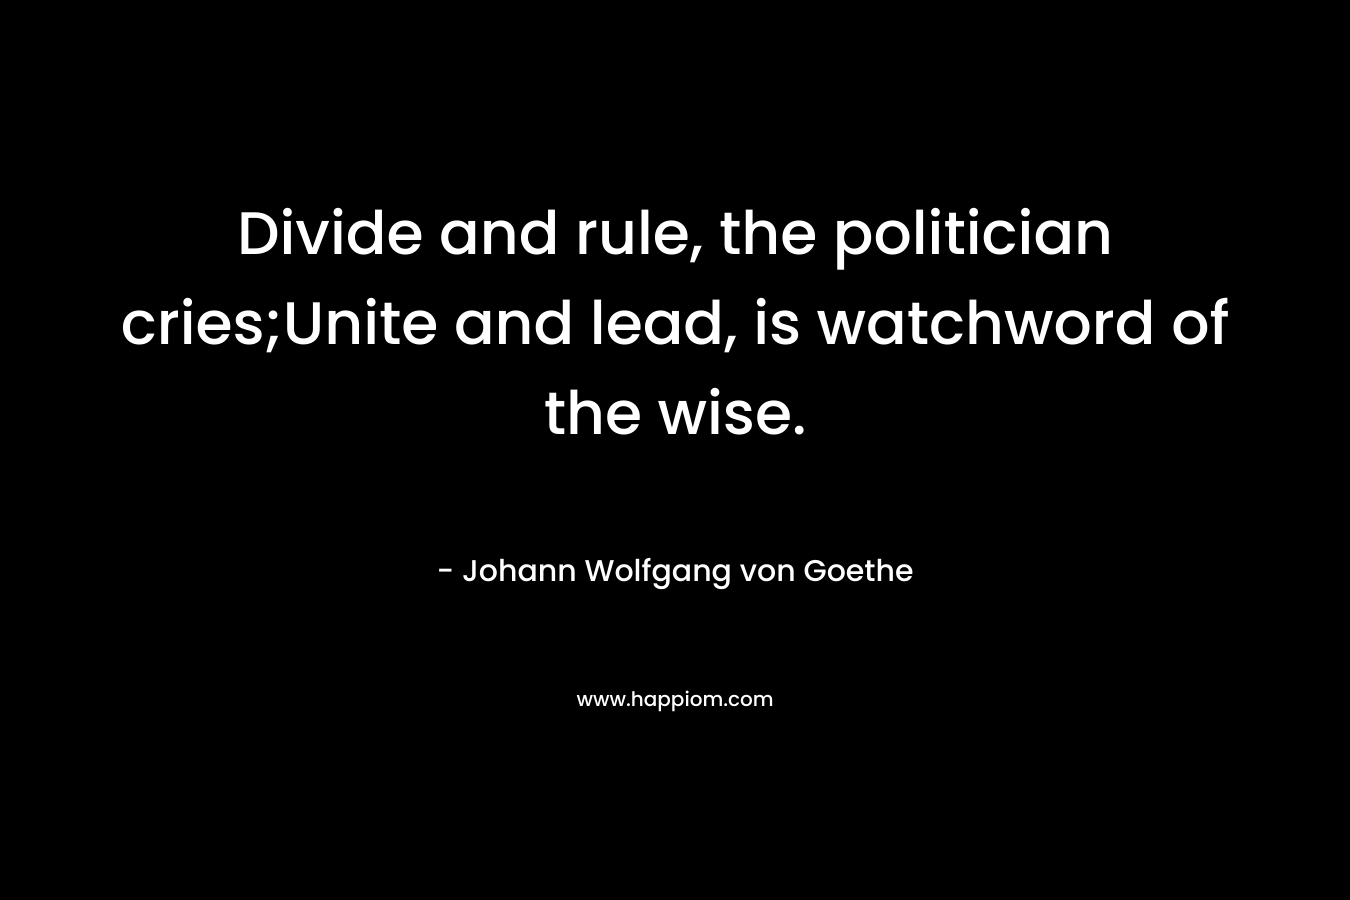 Divide and rule, the politician cries;Unite and lead, is watchword of the wise.